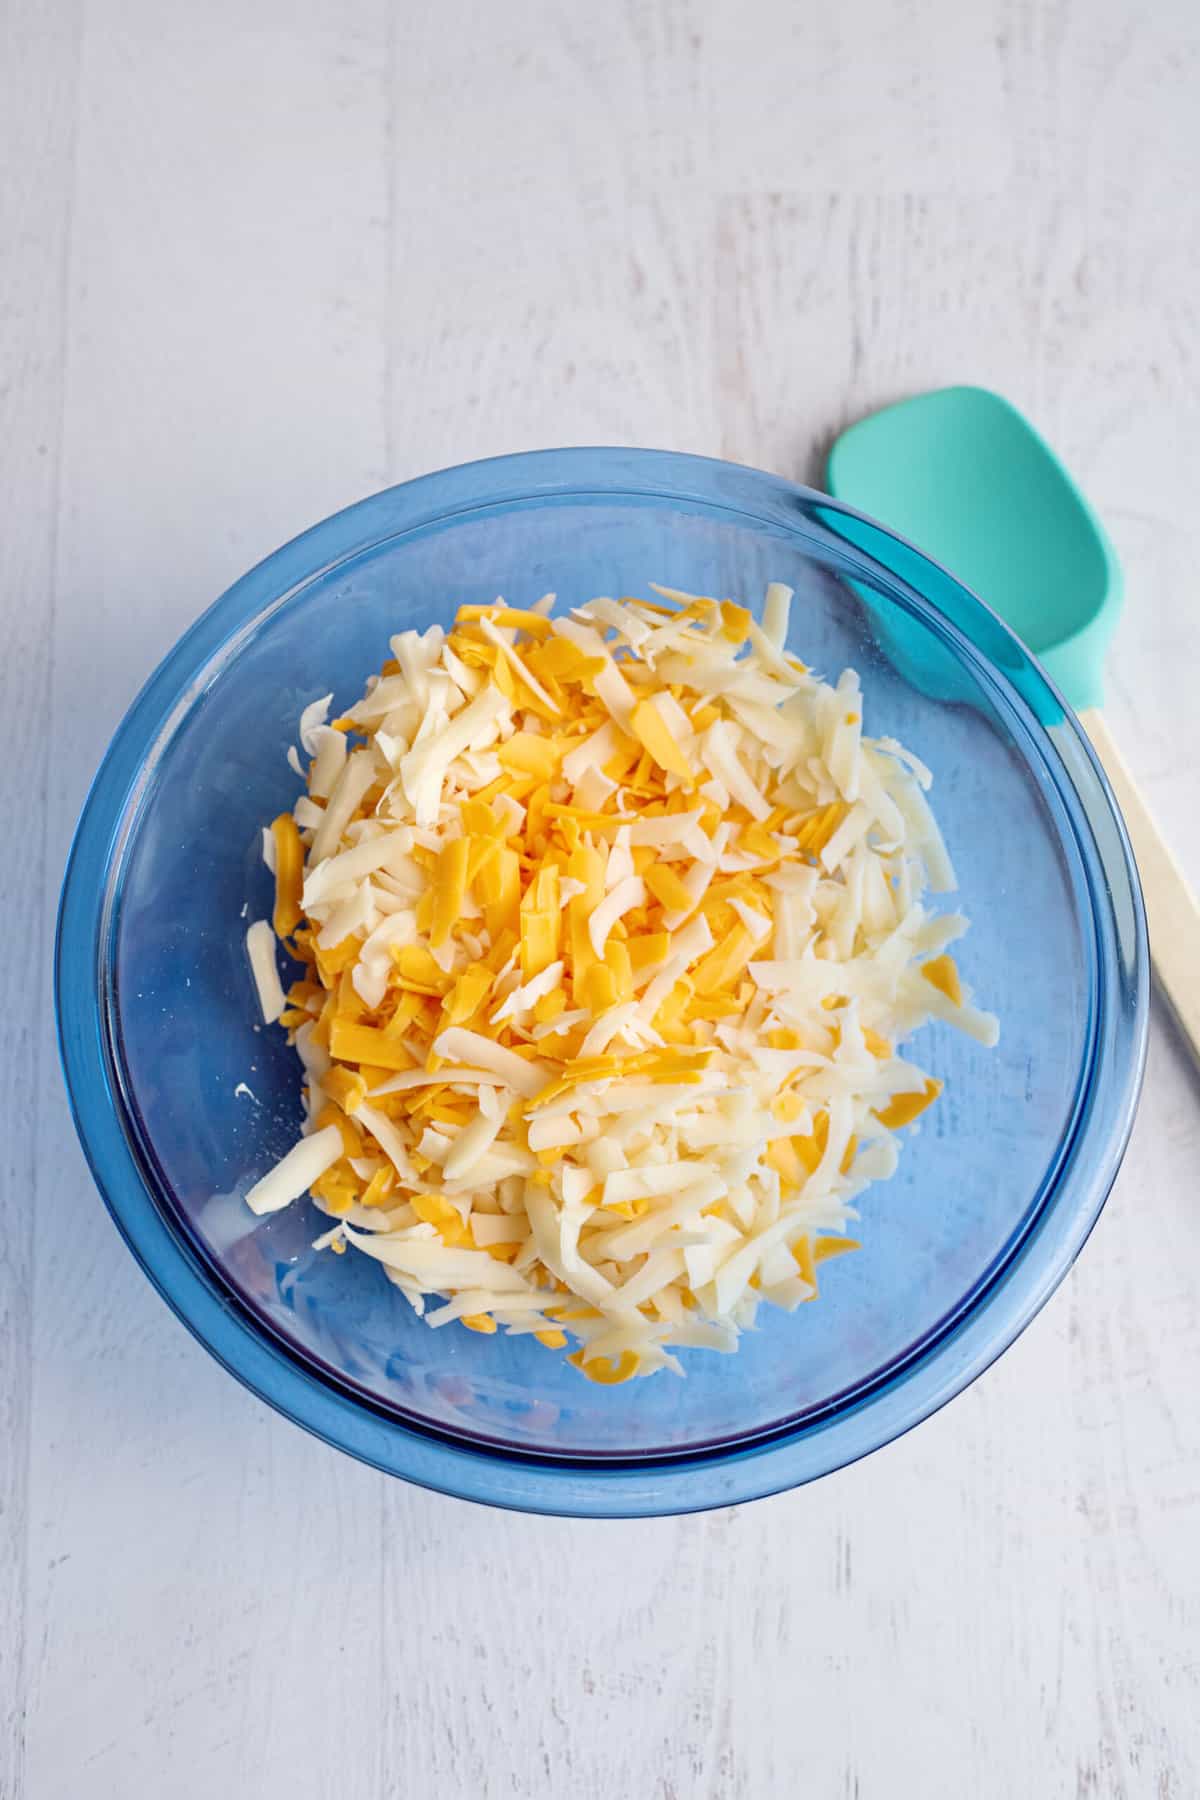 Place chopped onion and cheese into bowl with cream cheese.